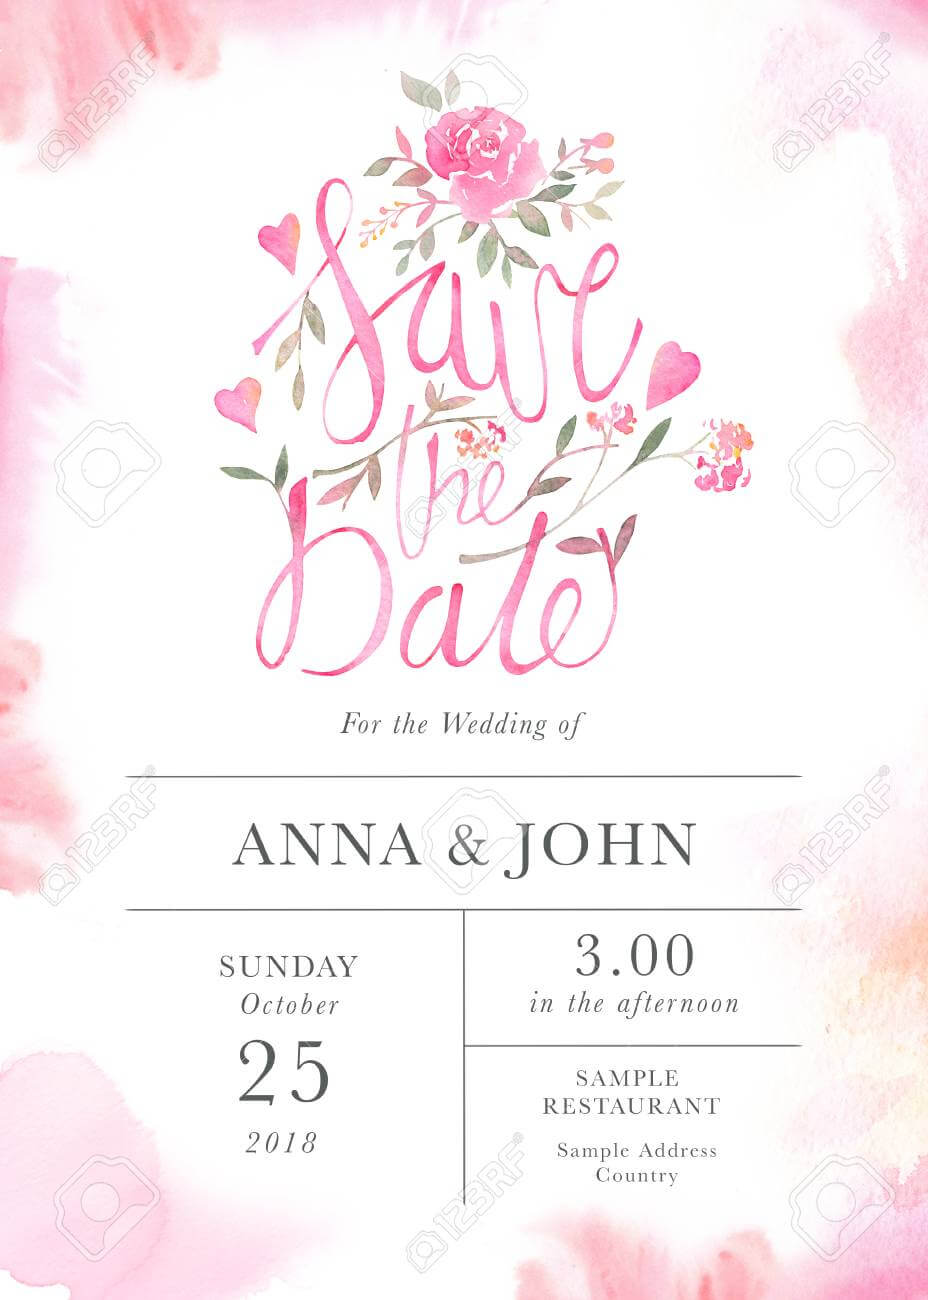 Wedding Invitation Card Template With Watercolor Rose Flowers Pertaining To Sample Wedding Invitation Cards Templates